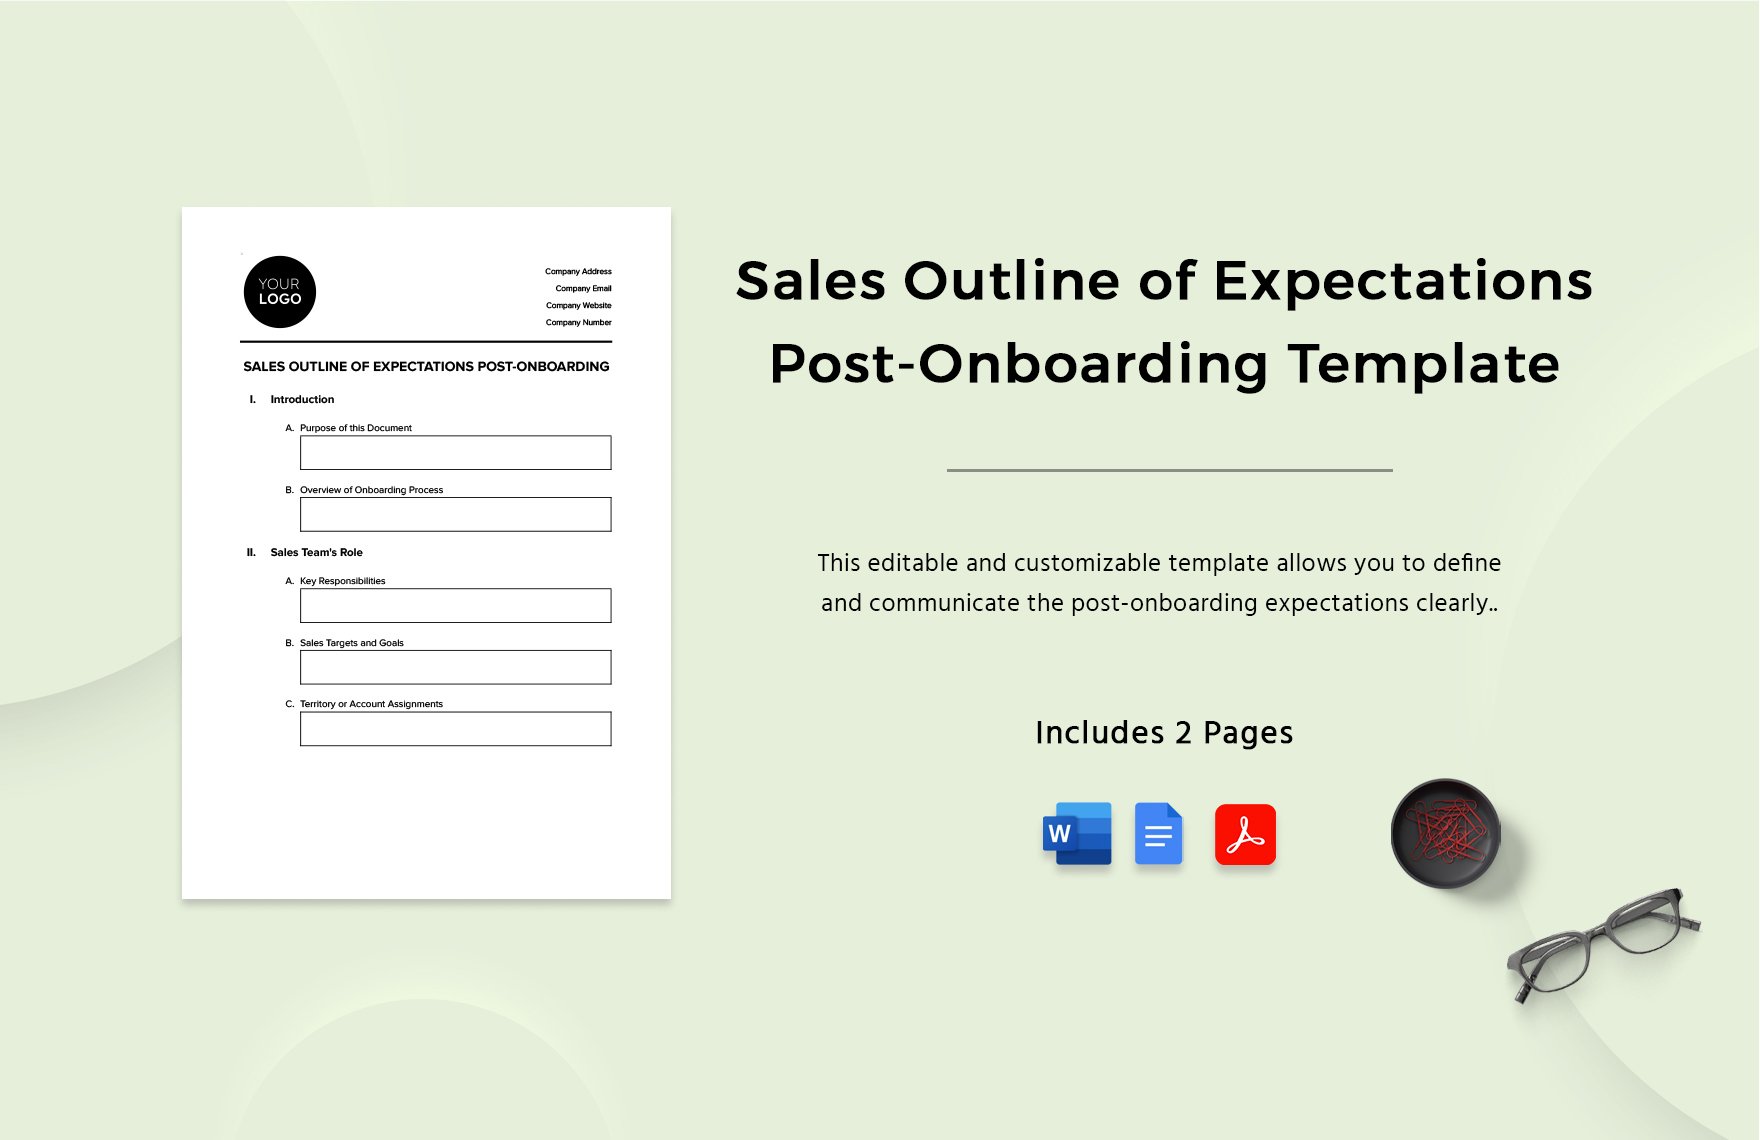 Feedback Policy After Sales Training Template in Word, Google Docs, PDF